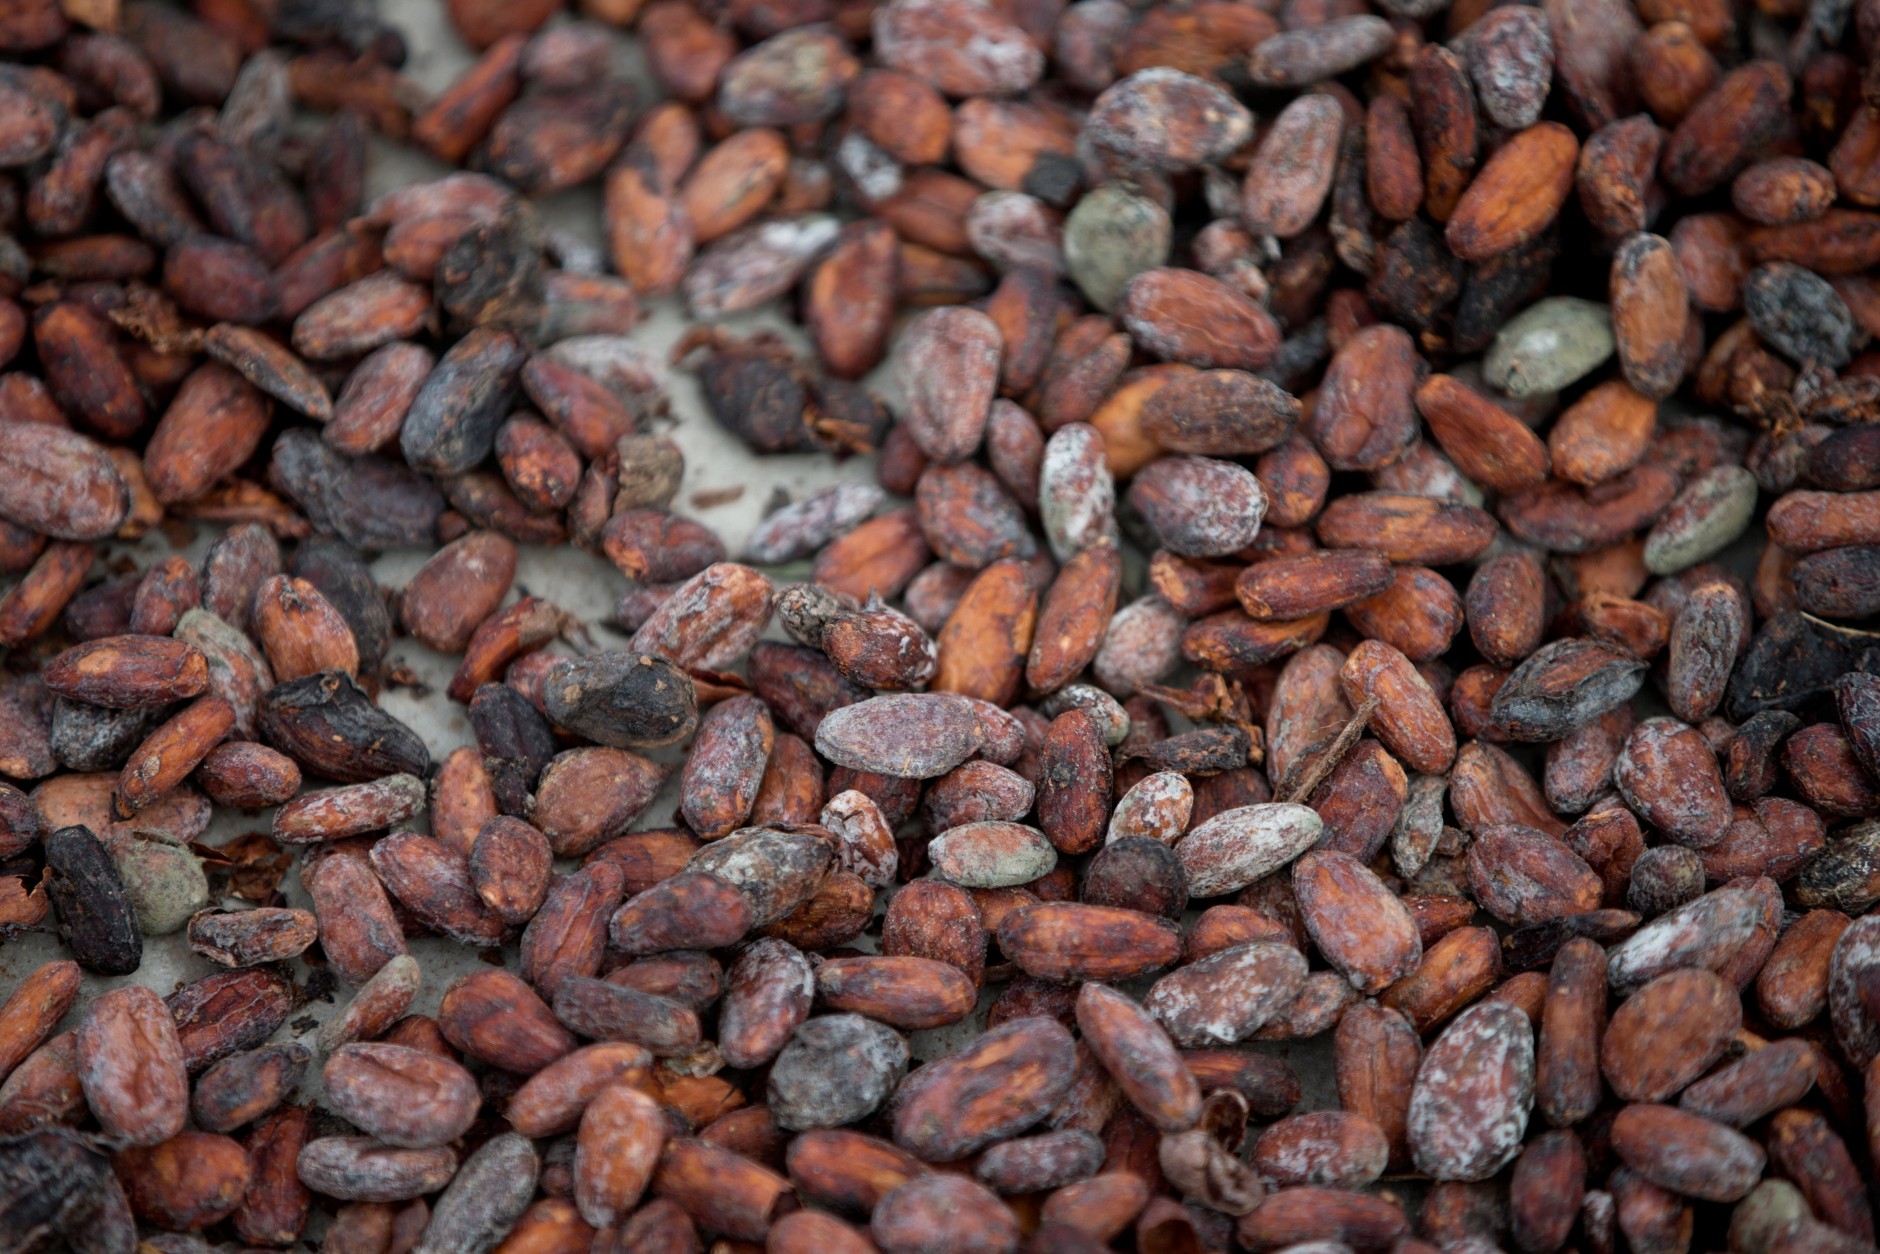 In this April 16, 2015 photo, cacao beans dry under sun at the Agropampatar chocolate farm Co-op in El Clavo, Venezuela. Today the country exports just 8,000 tons of cacao a year, for revenue of about $30 million, slightly less than it earns from exporting another signature product, rum. (AP Photo/Fernando Llano)